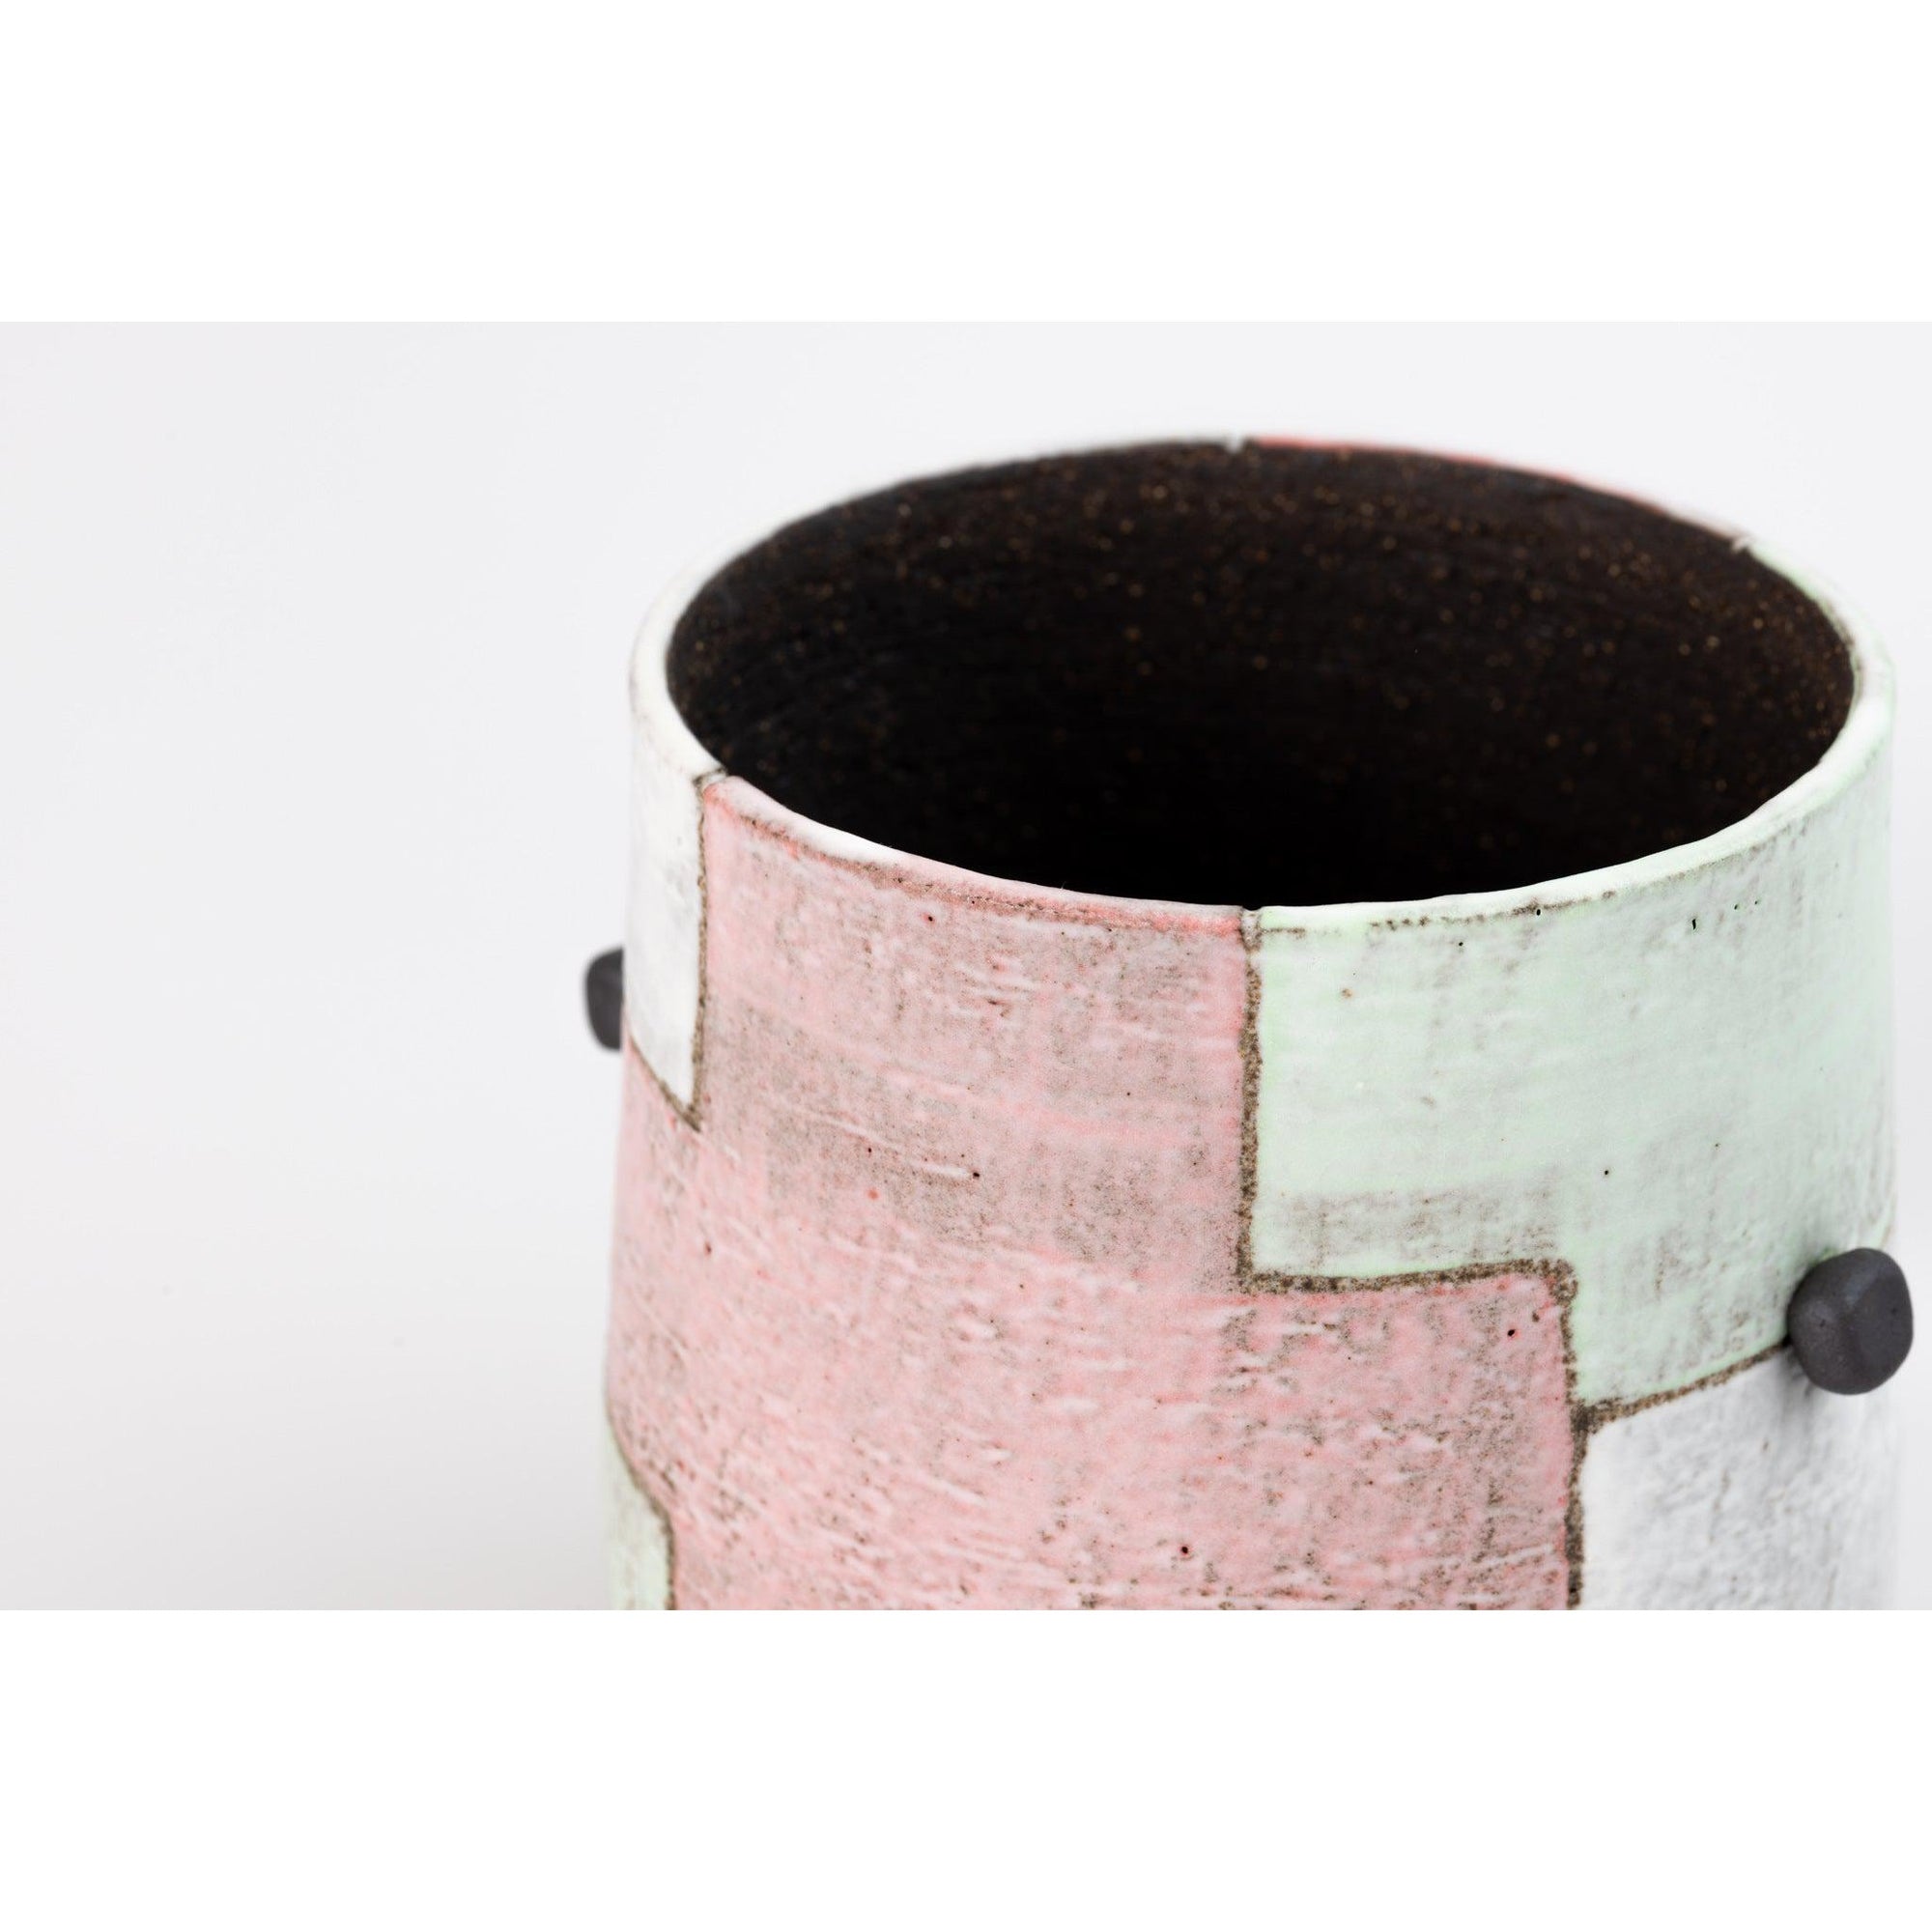 'AP40b Black Vessel with "washed" colours' by Ania Perkowska, available at Padstow Gallery, Cornwall